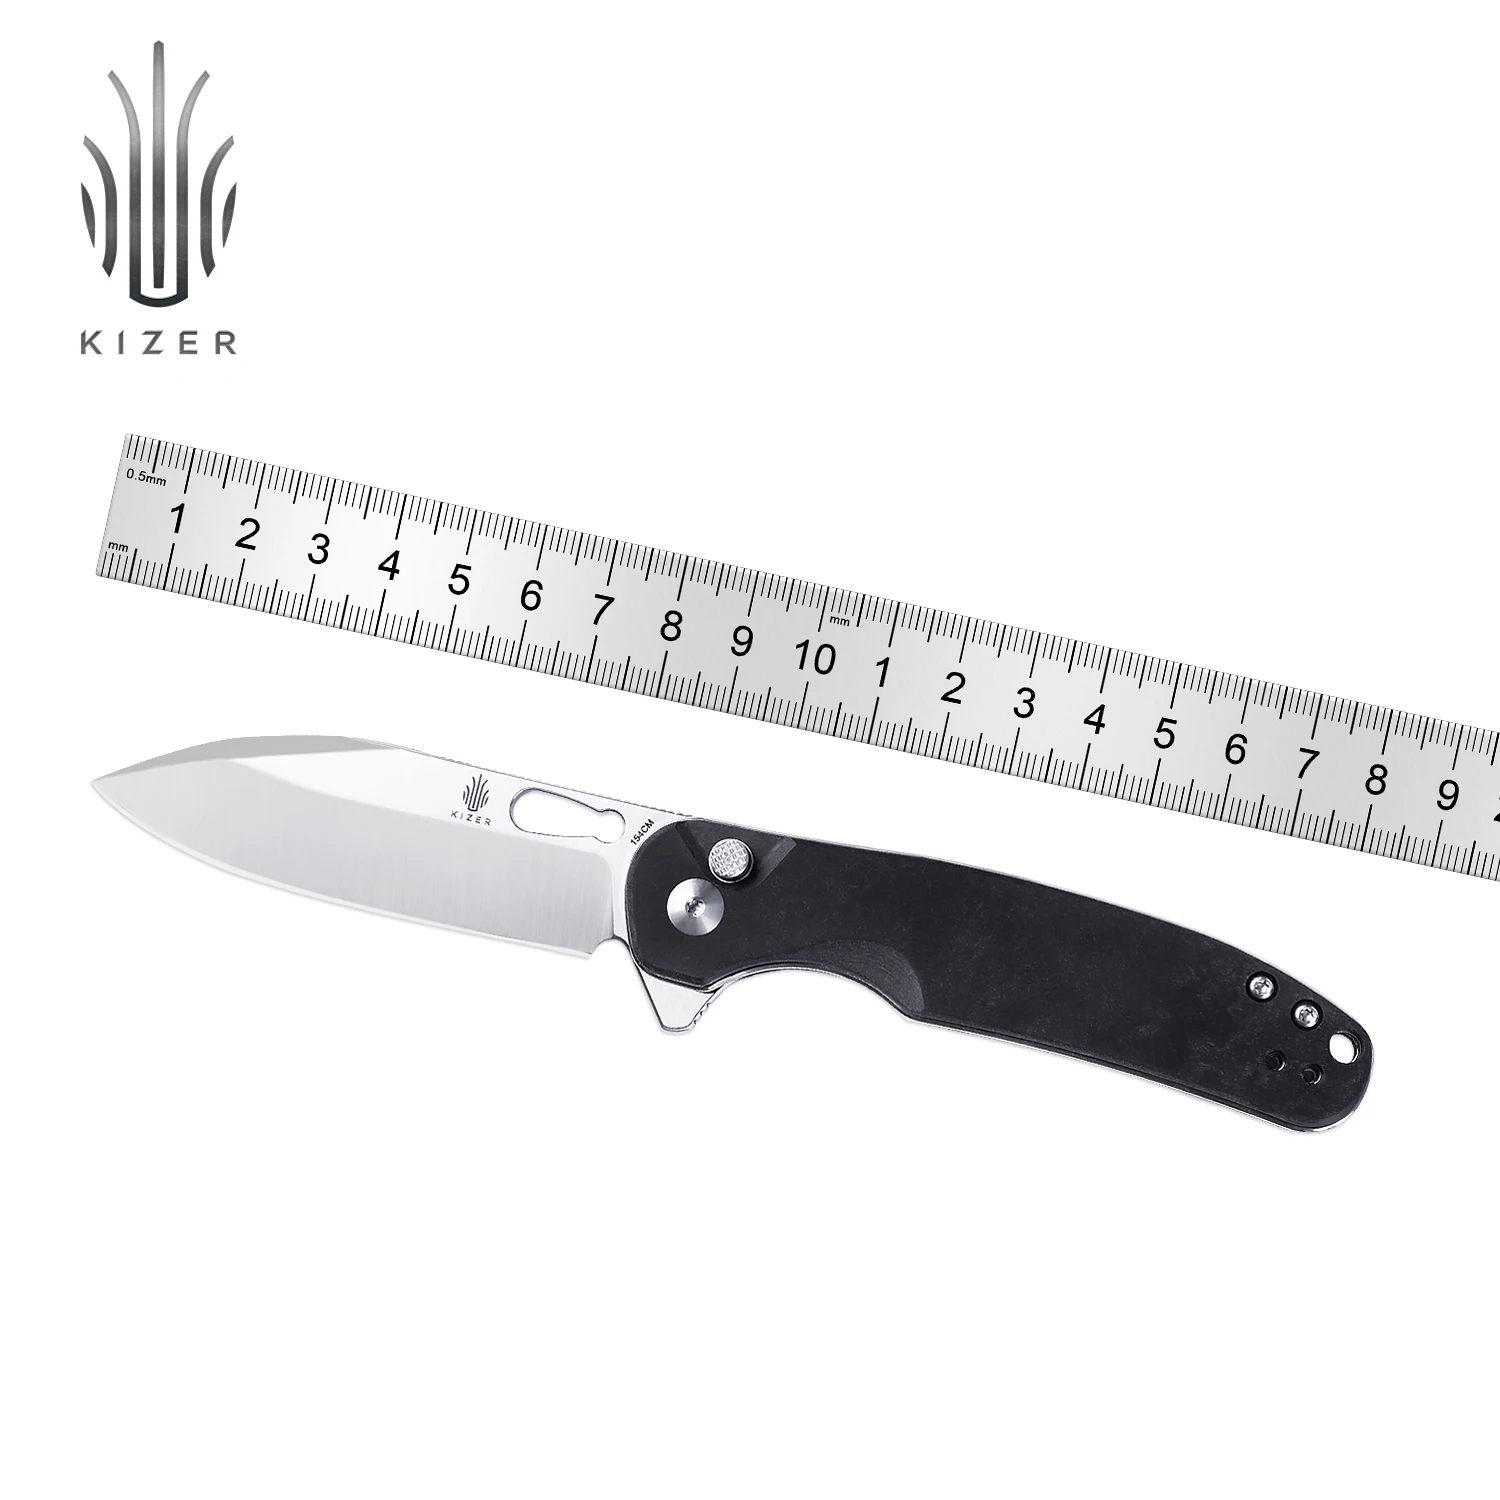 Kizer EDC Pocket Knife  HIC-CUP V3606C2 2022 New Button Flipper Knife with Black Richlite Handle Outdoor Camping Tools